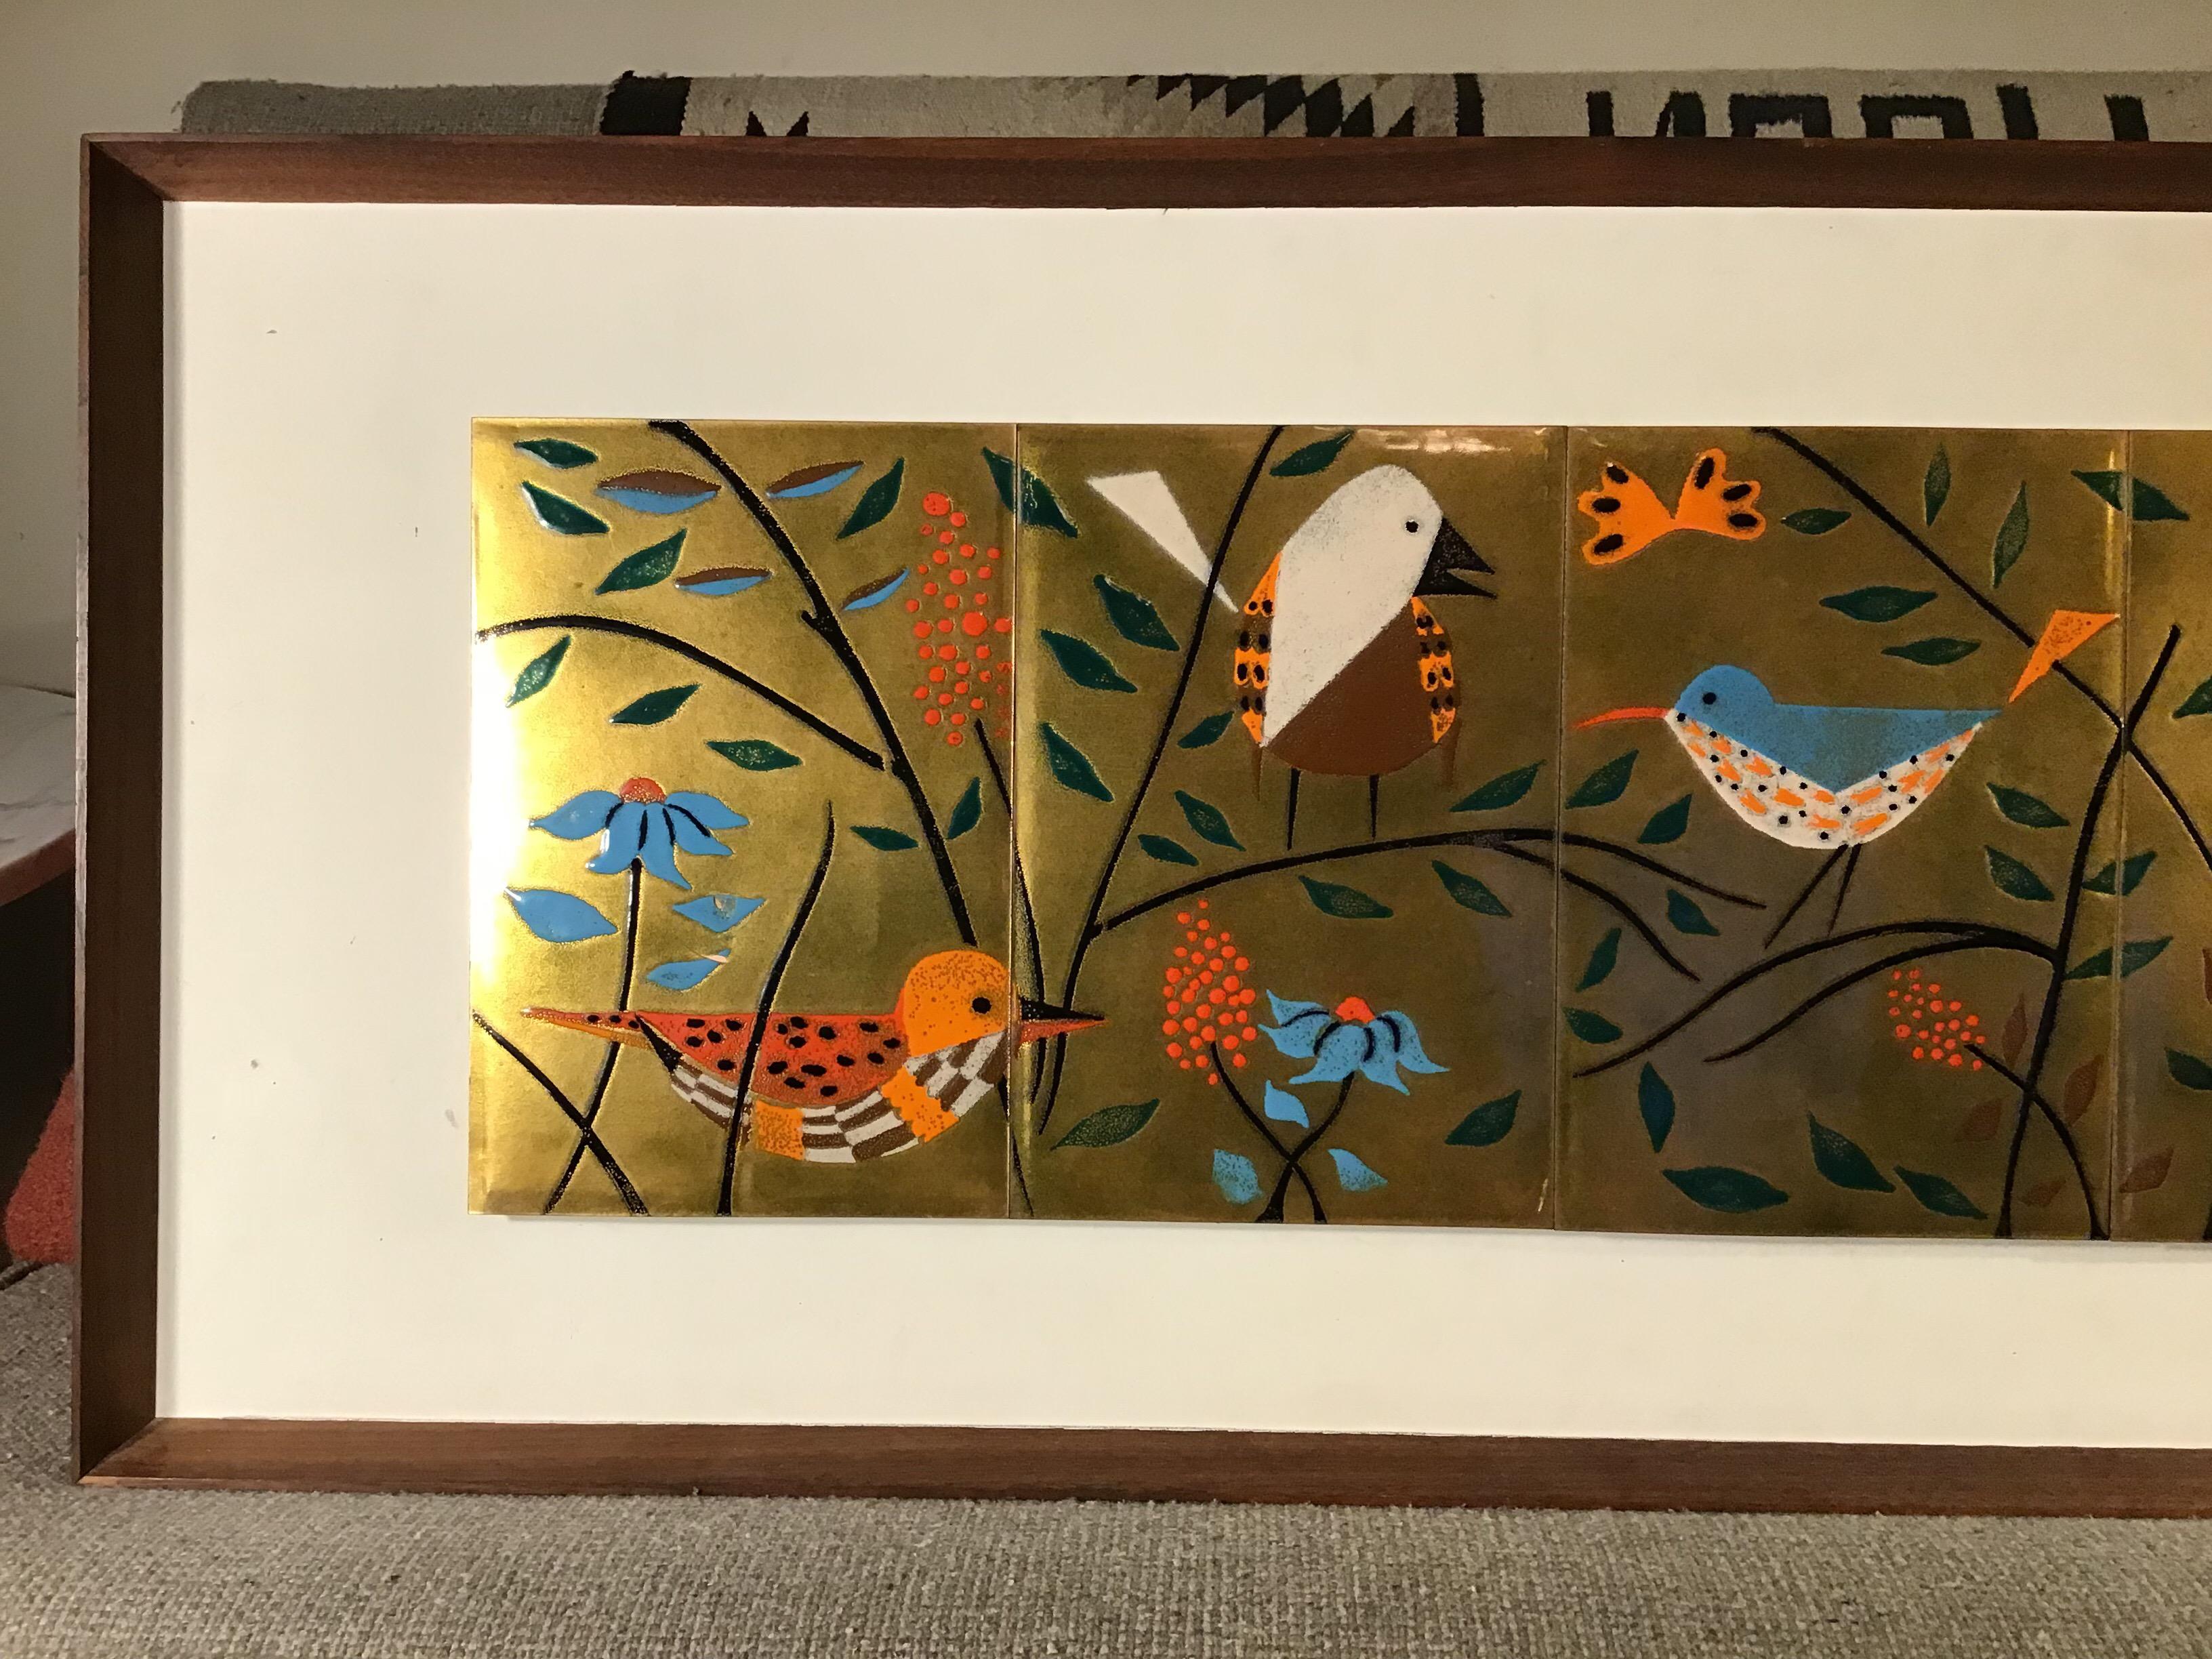 This is an absolutely wonderful vintage, circa 1950s, enamel on copper picture. It is by artist Judith Daner, known for her enamel works. This is the best I've seen! It depicts several modernist style birds in the trees, one even in a nest. This is